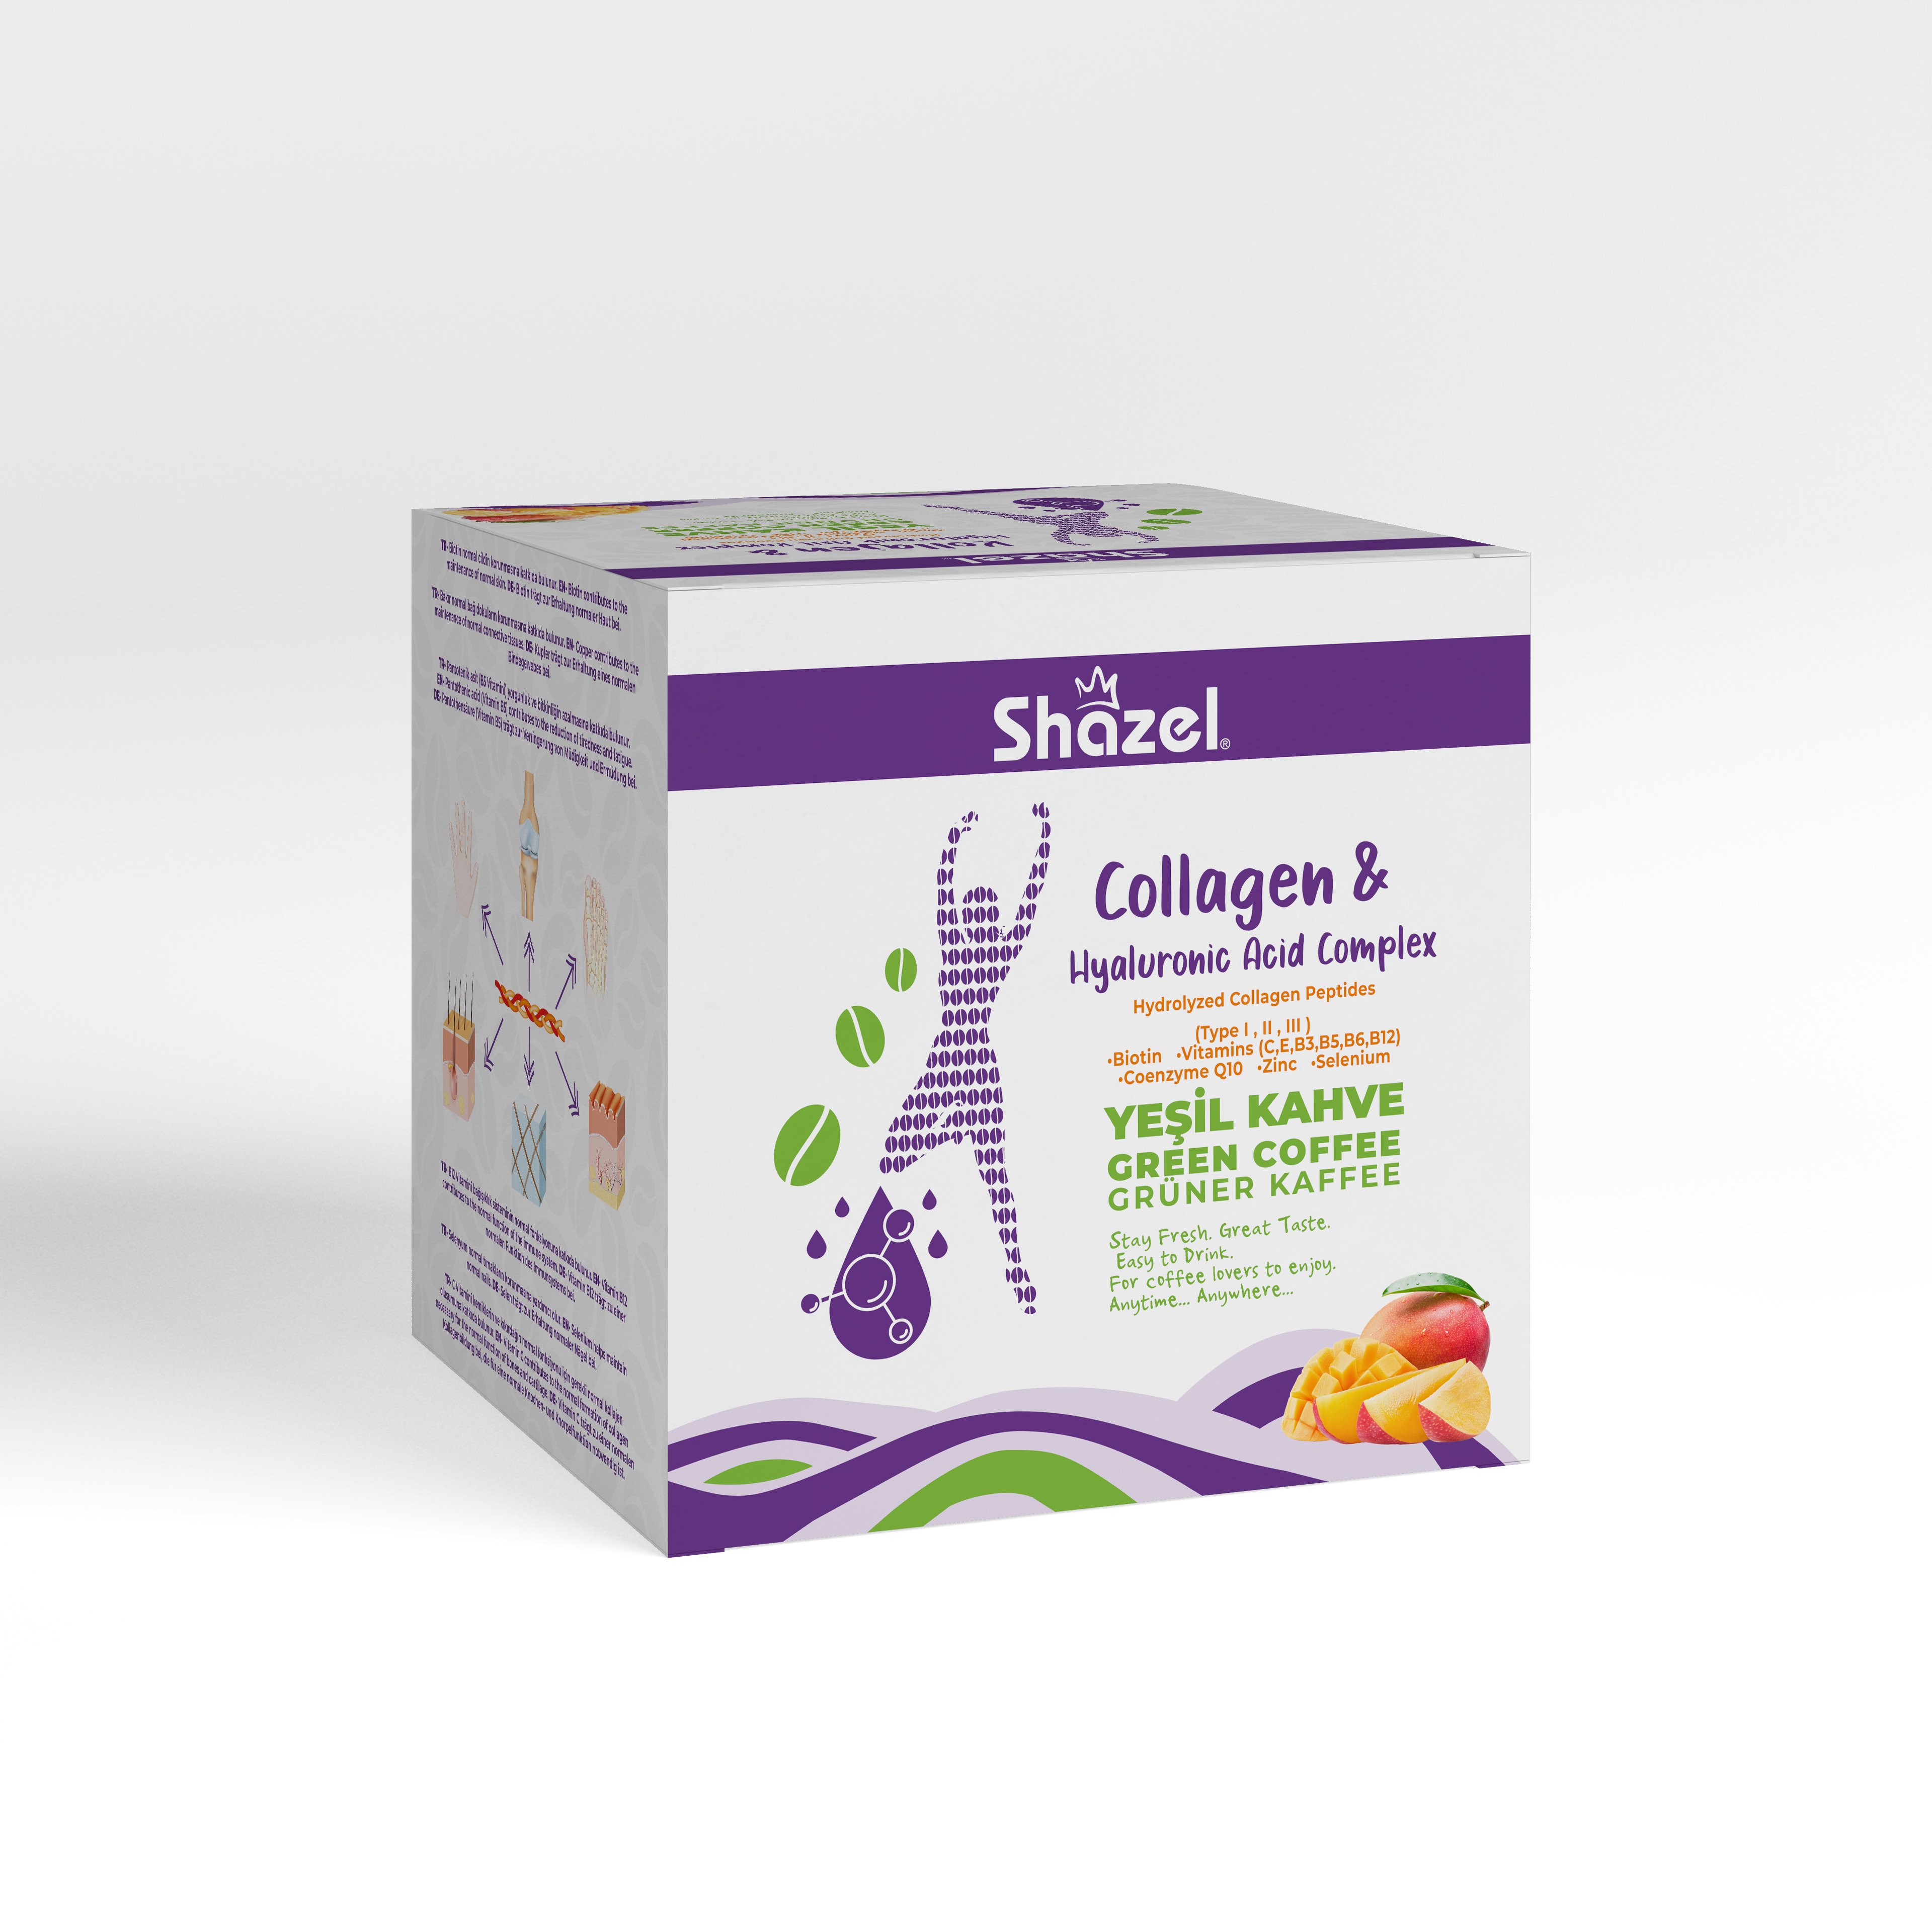 SHAZEL GREEN COFFEE WITH COLAGEN & HYALURONIC ACID COMPLEX 10g x 12 Pieces 